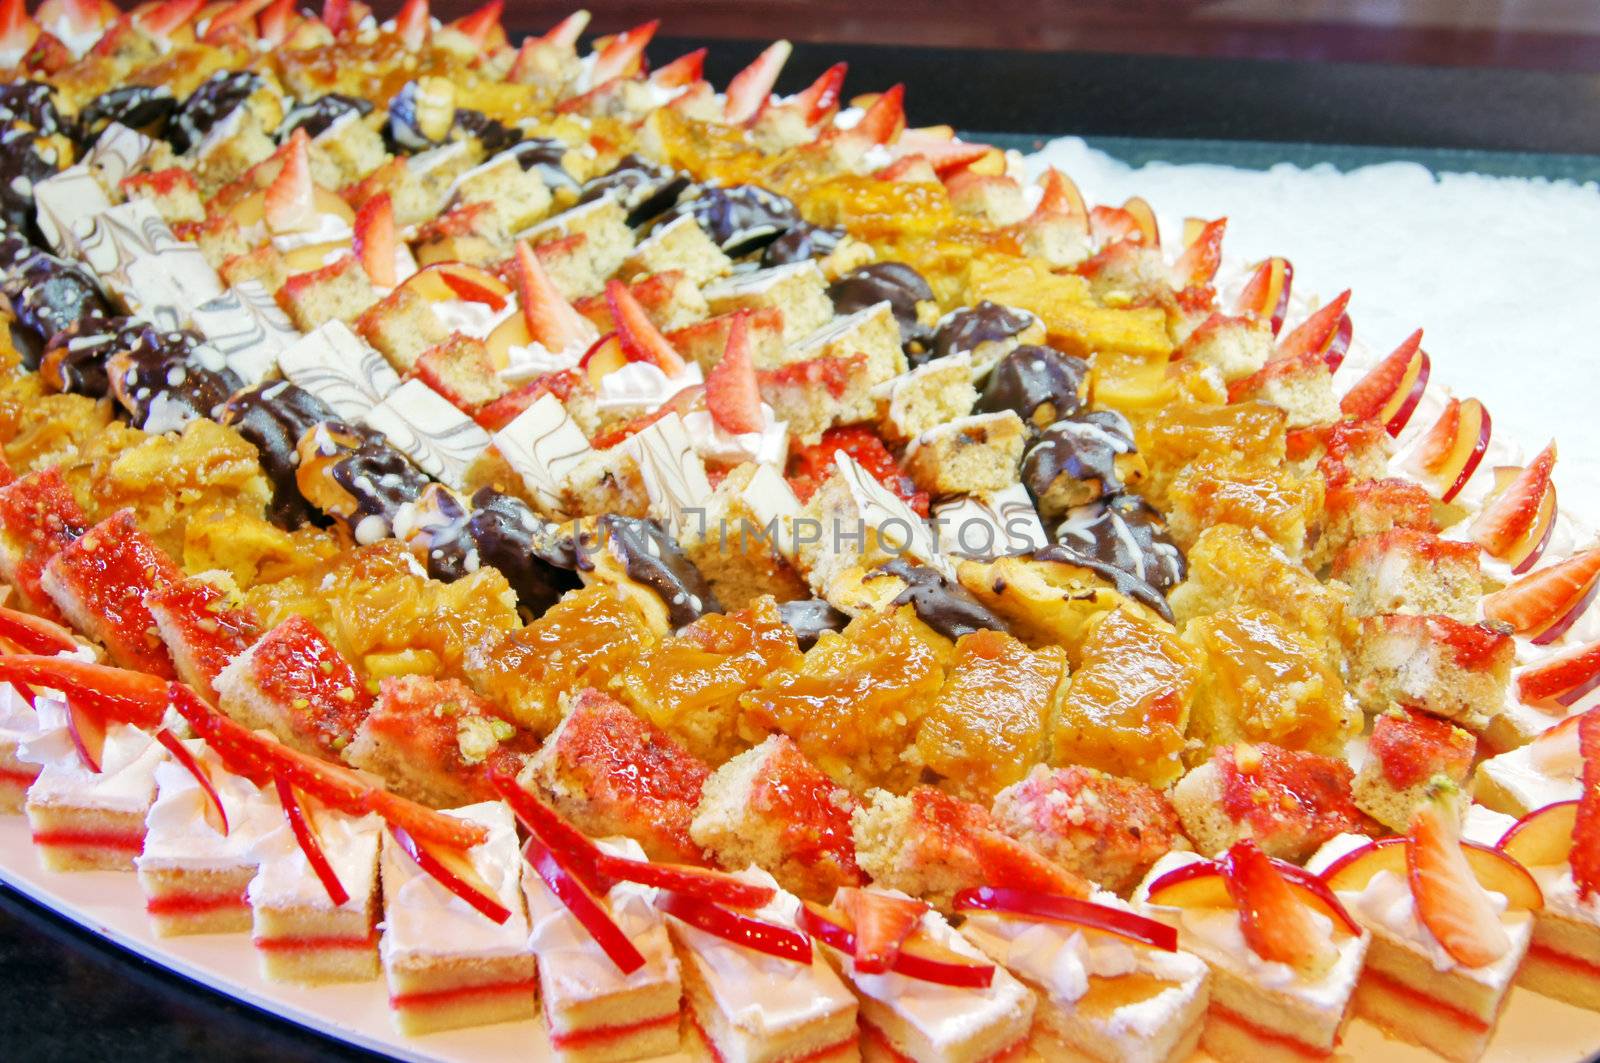 Cakes with tropical fruits at the table              